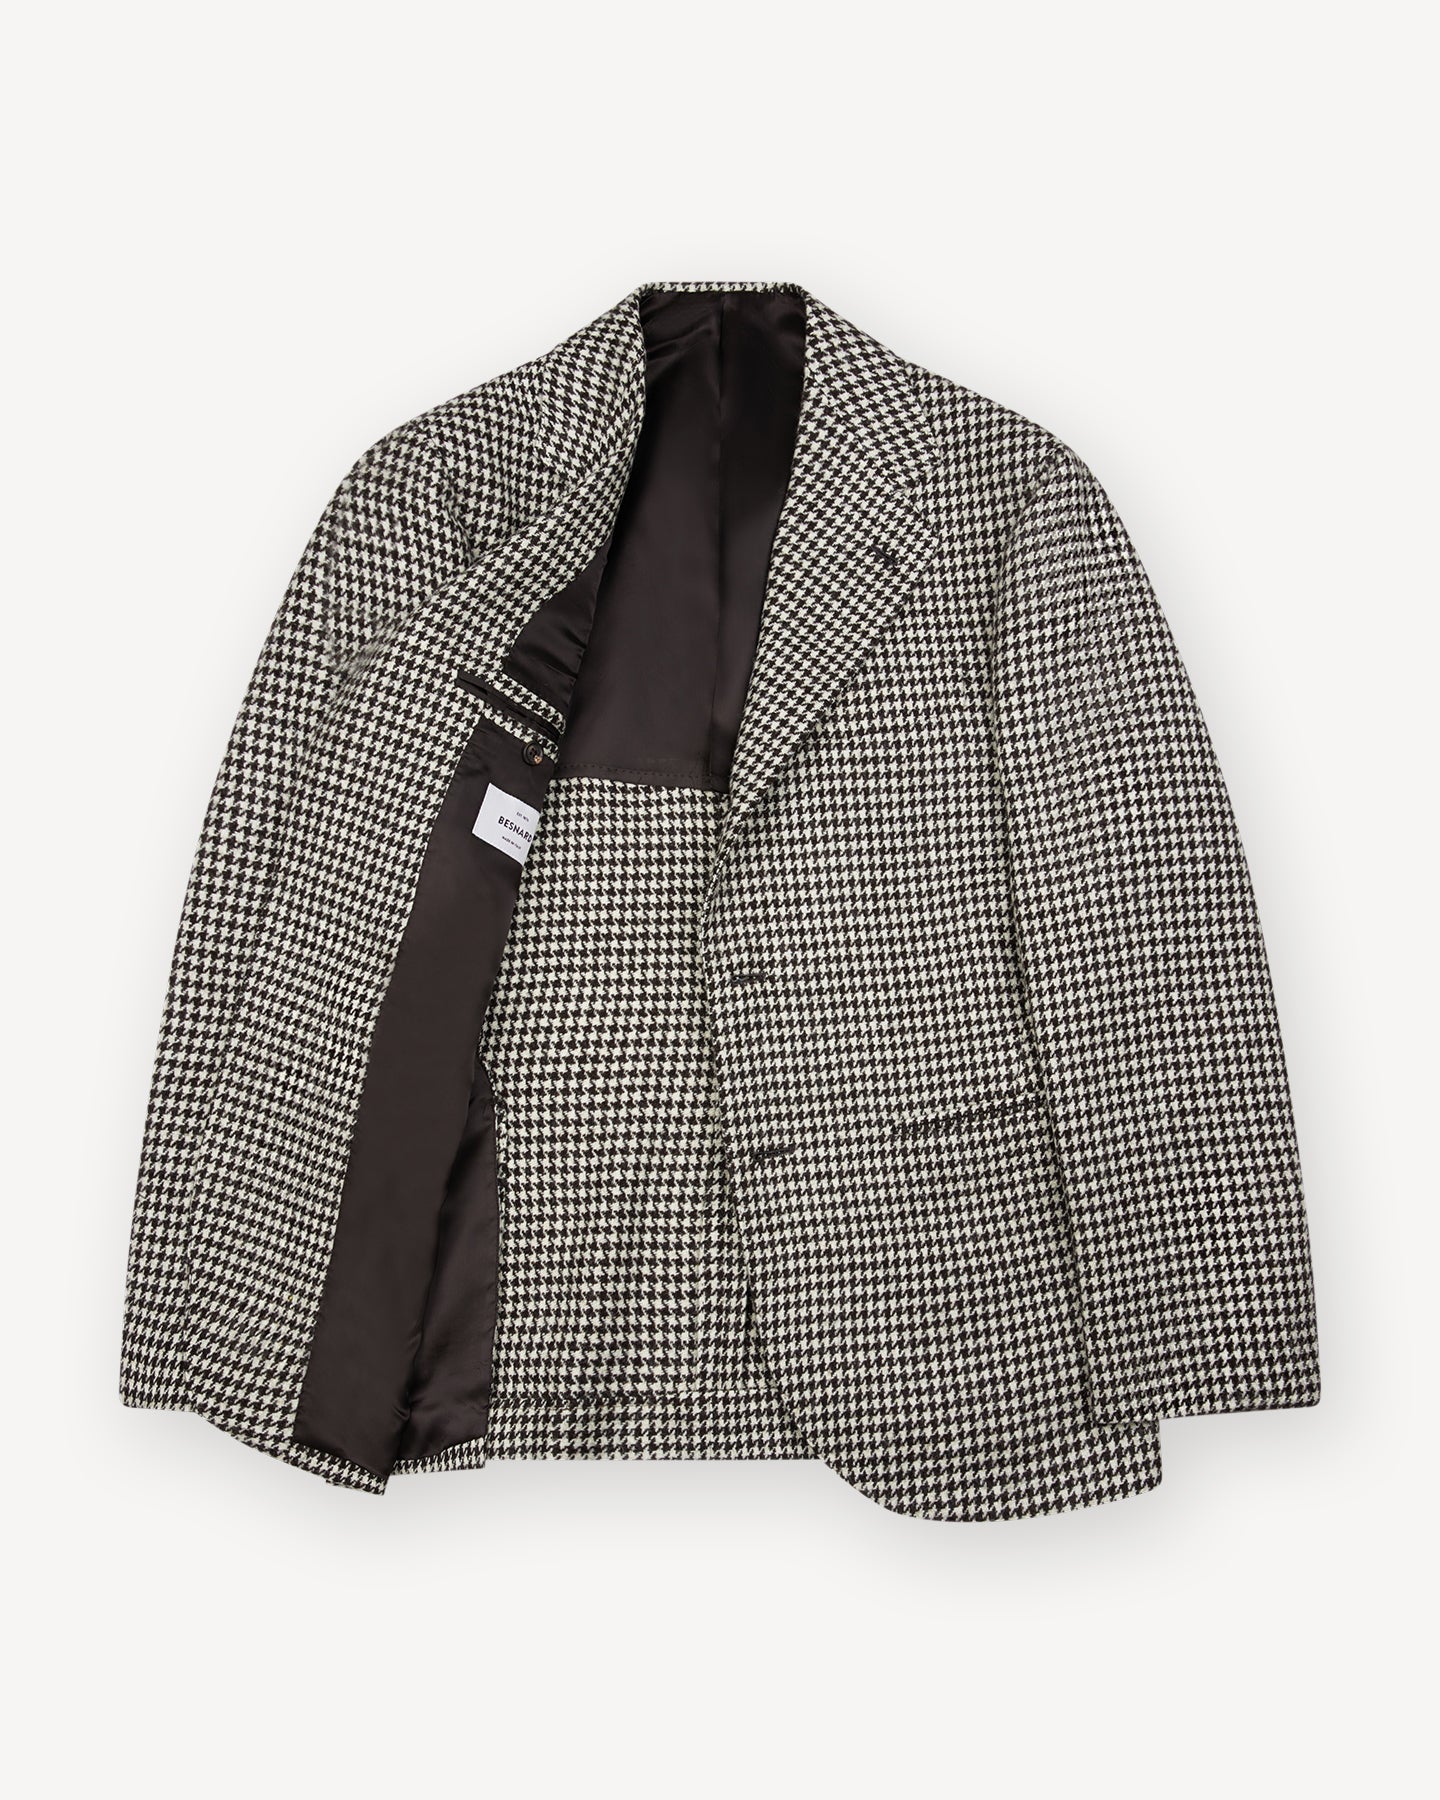 Unlined Black / White Houndstooth Undyed Wool Sport Coat